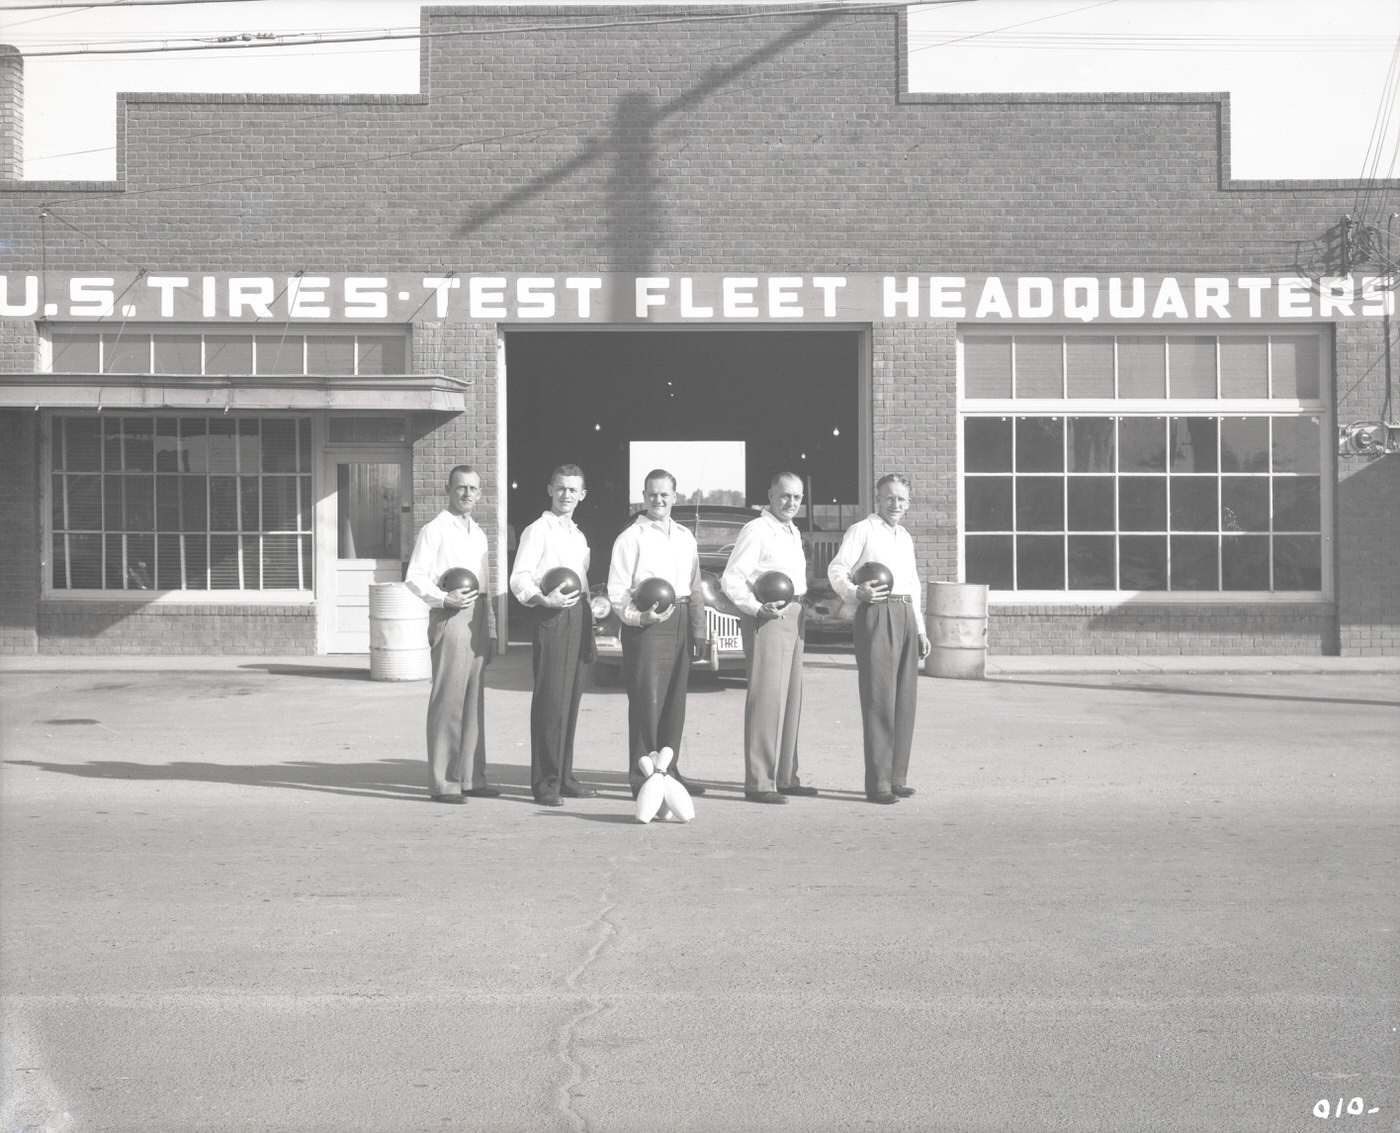 U.S. Tires Test Fleet Headquarters Building and Employees, 1943